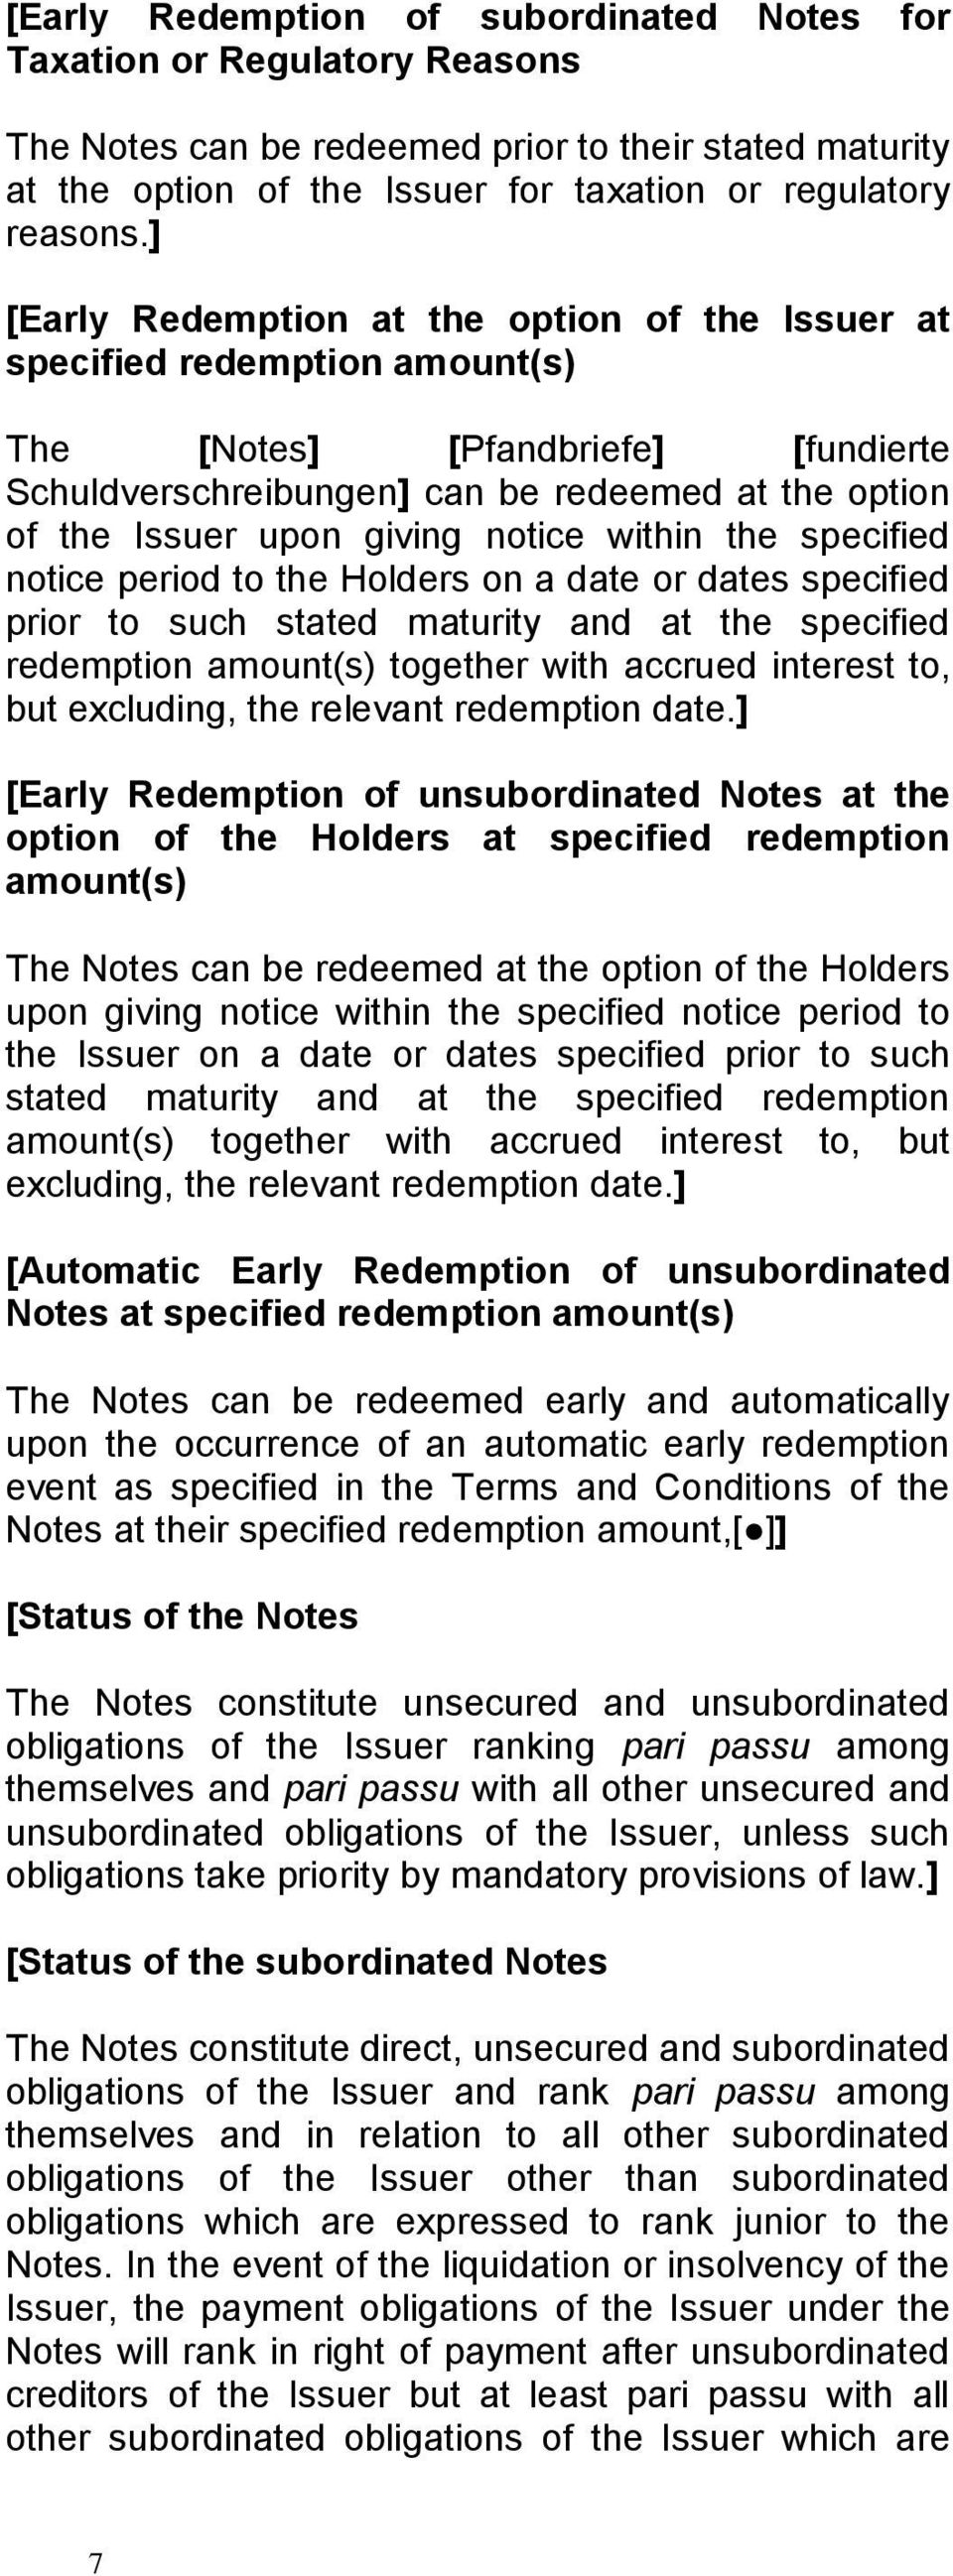 notice within the specified notice period to the Holders on a date or dates specified prior to such stated maturity and at the specified redemption amount(s) together with accrued interest to, but